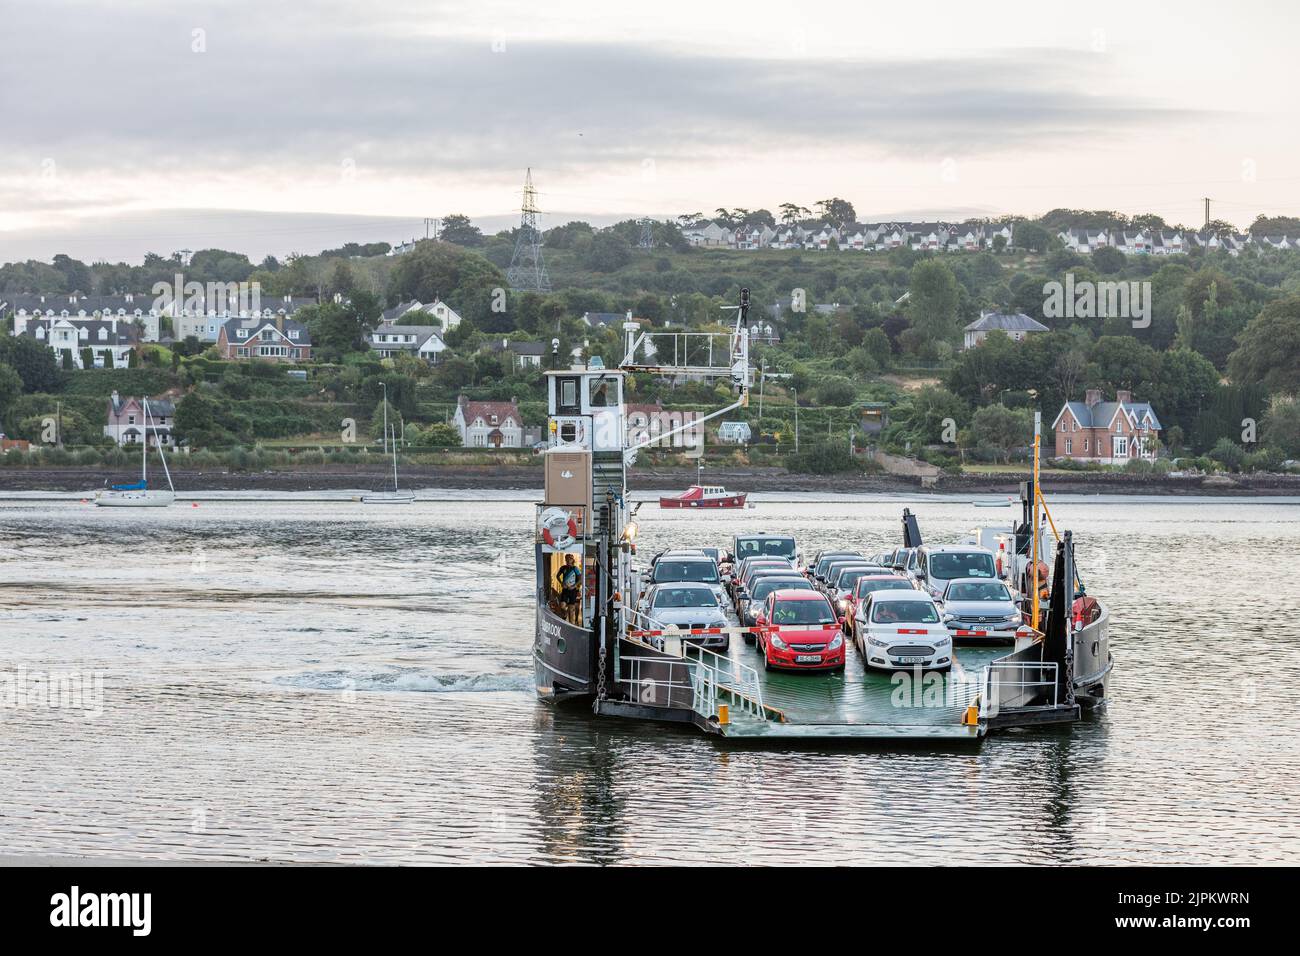 Rushbrooke, Cork, Ireland. 19th August, 2022. Cross River Ferry Glenbrook makes a dawn crossing from Rushbrooke, Co. Cork, Ireland.- Credit; David Creedon / Alamy Live News Stock Photo